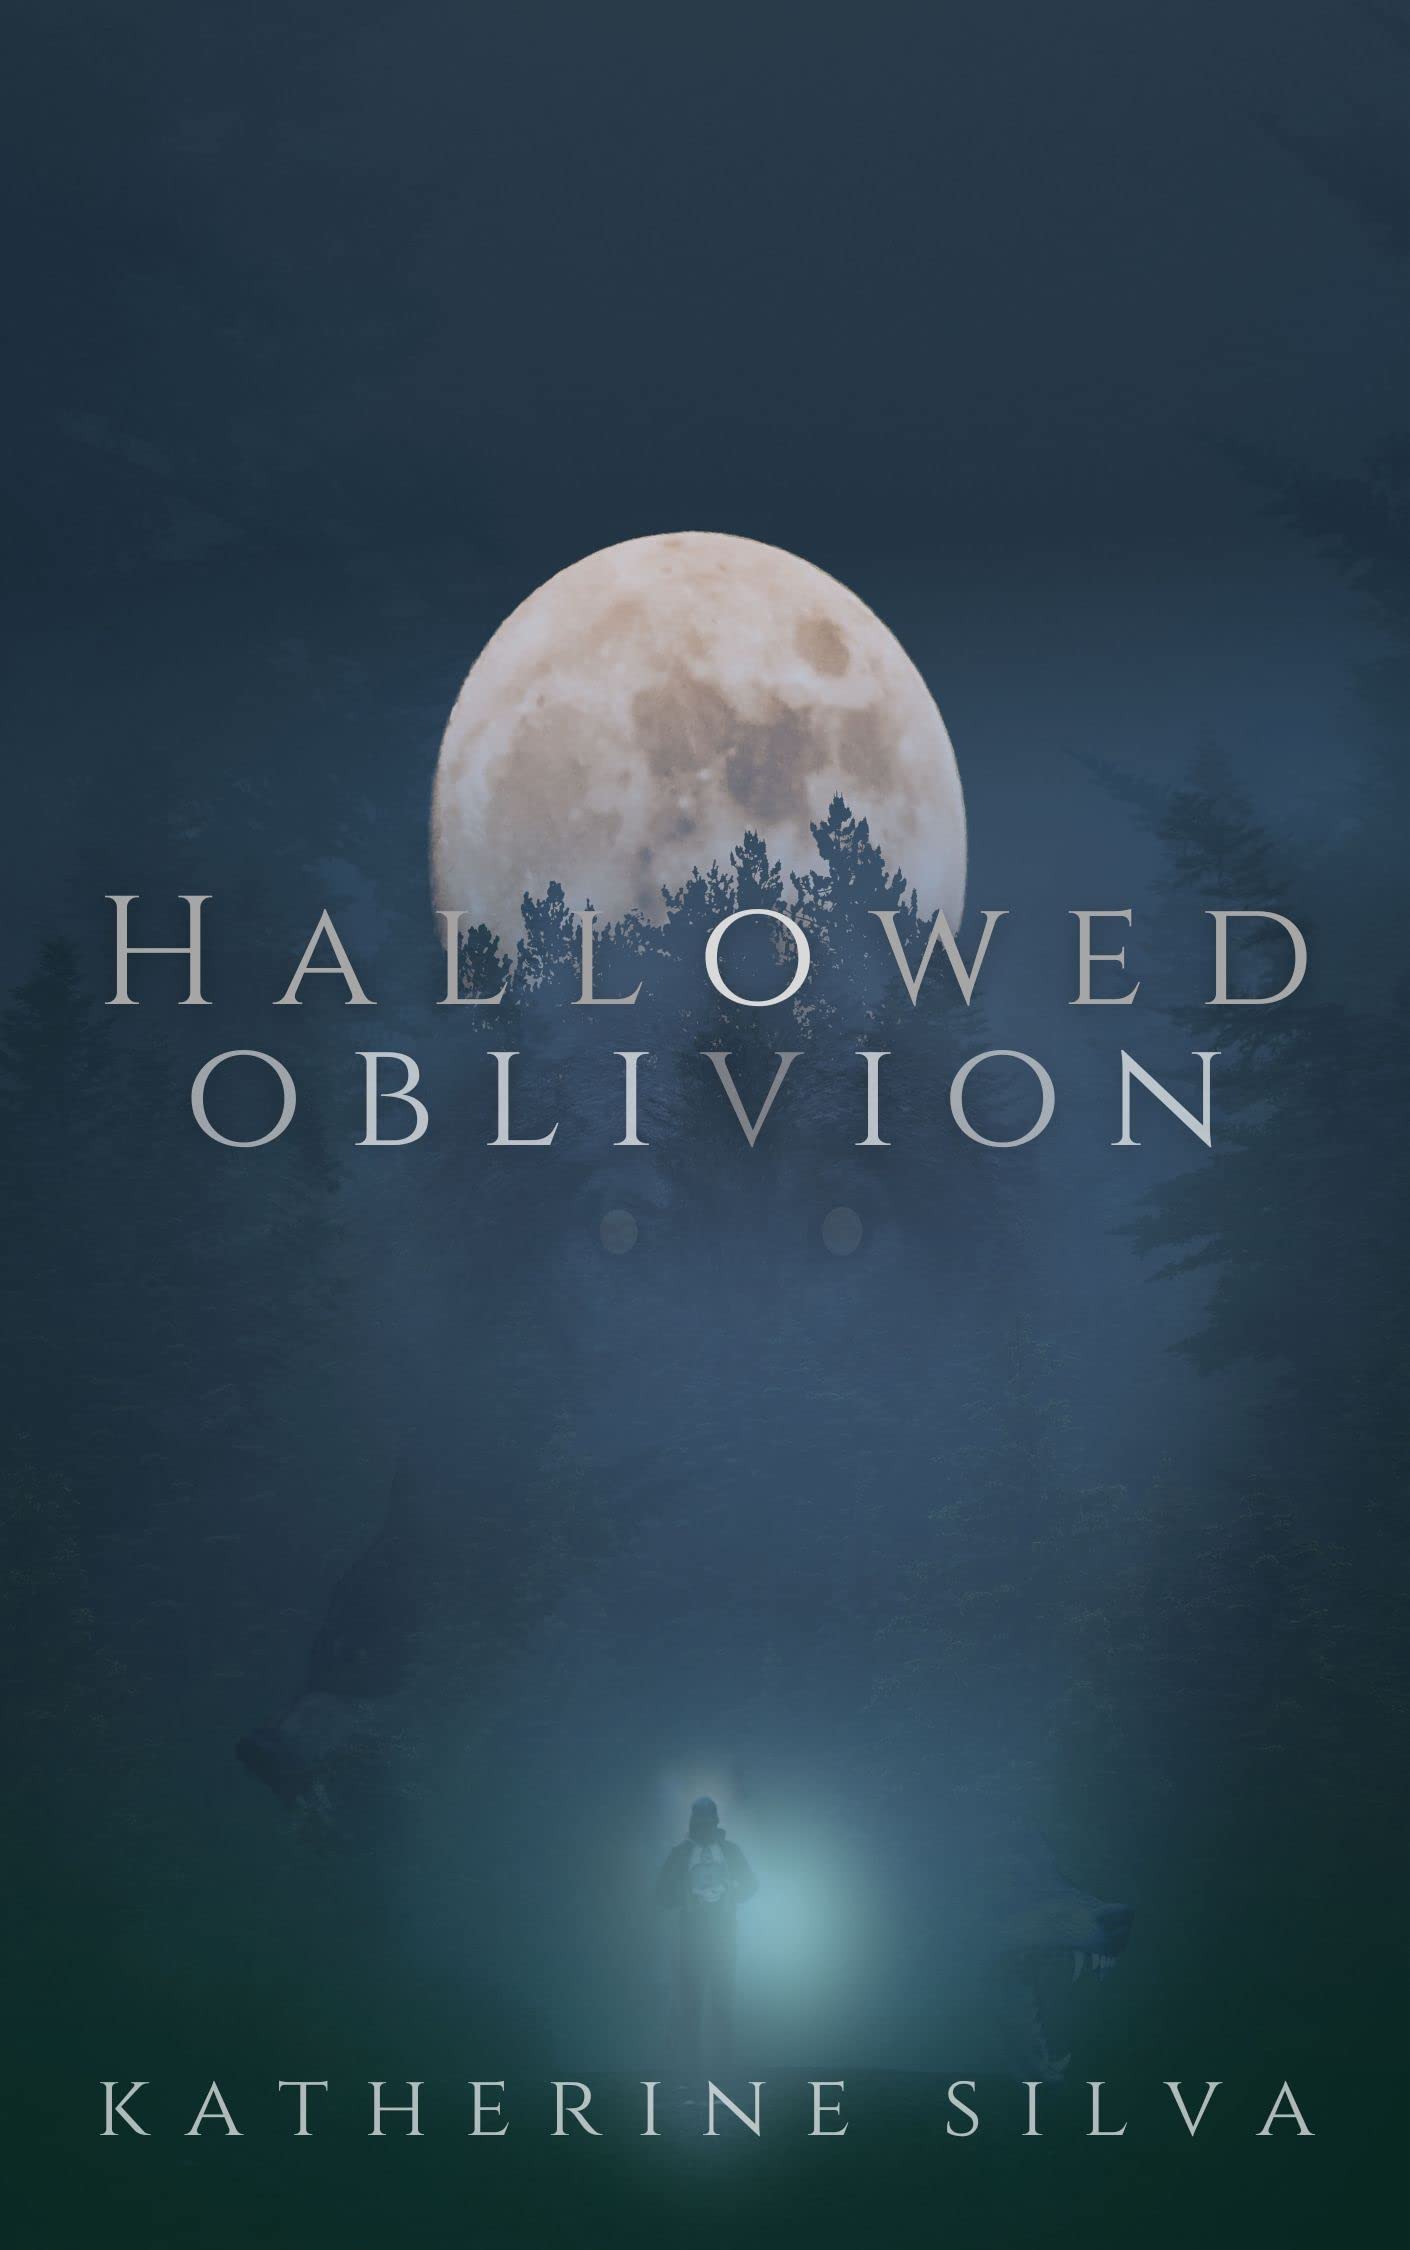 
					Cover art from "Hallowed Oblivion" by 